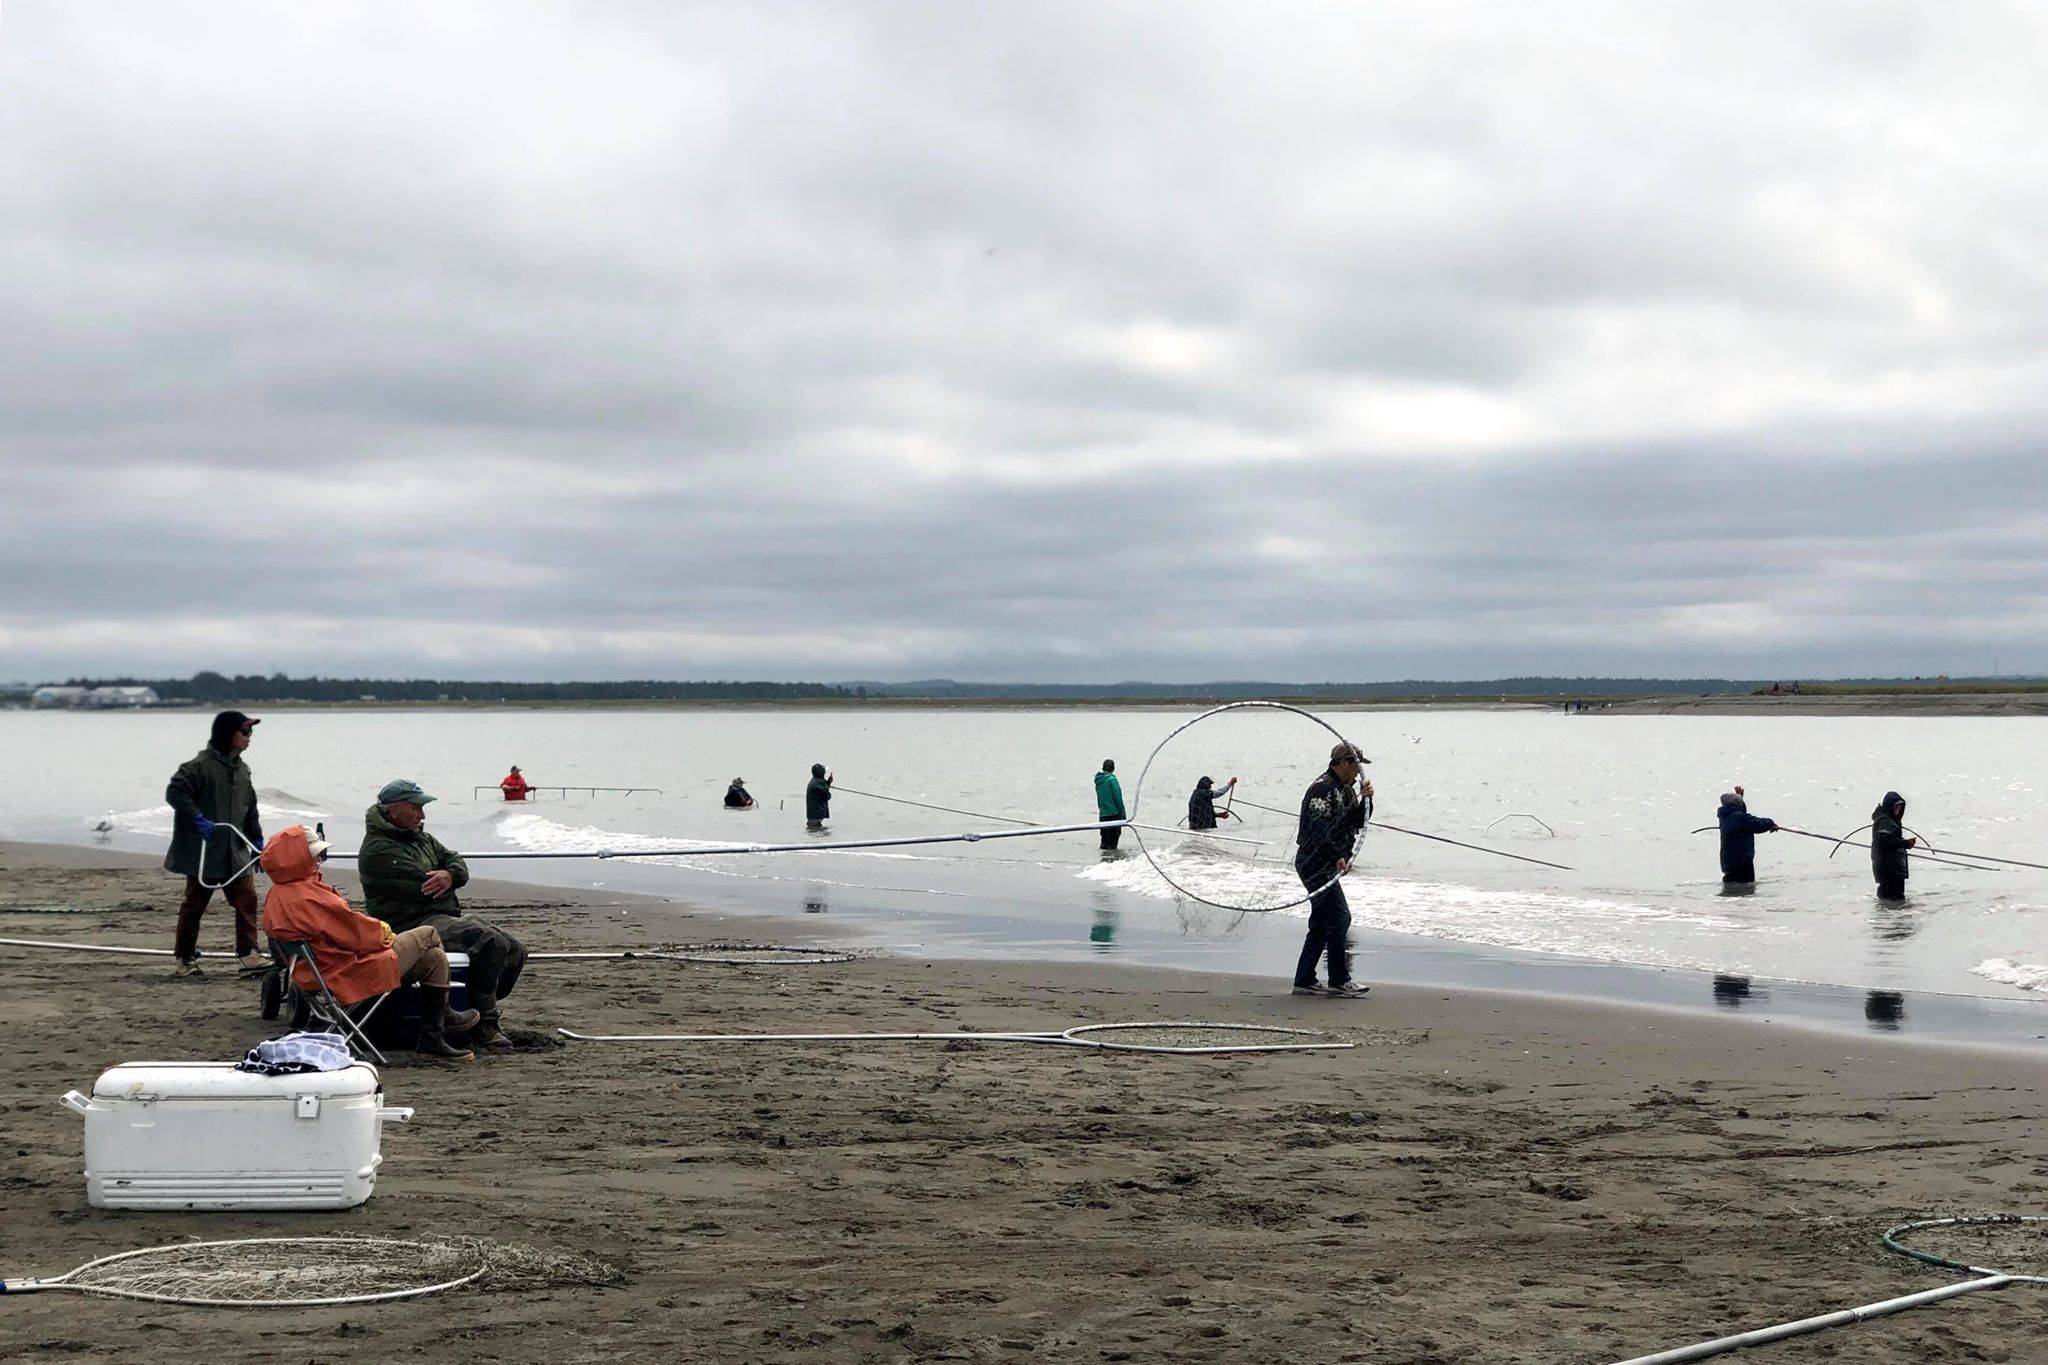 People from all over Alaska come to fish on opening day of the Kenai River personal use dipnetting fishery, Wednesday, July 10, 2019, in Kenai, Alaska. (Photo by Victoria Petersen/Peninsula Clarion)